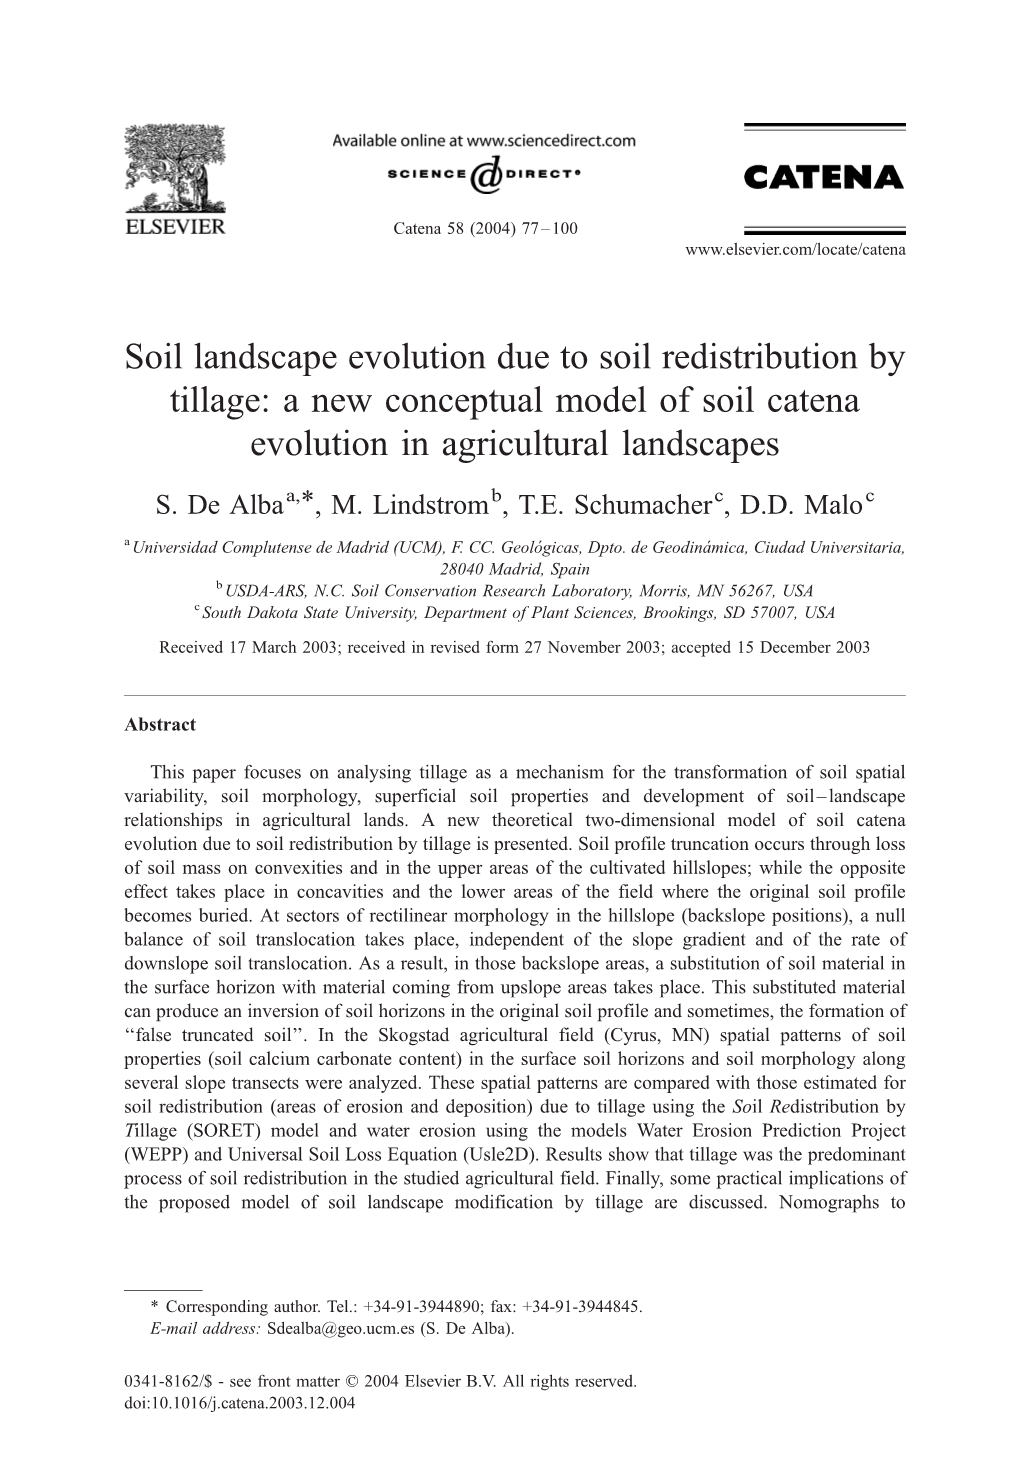 A New Conceptual Model of Soil Catena Evolution in Agricultural Landscapes